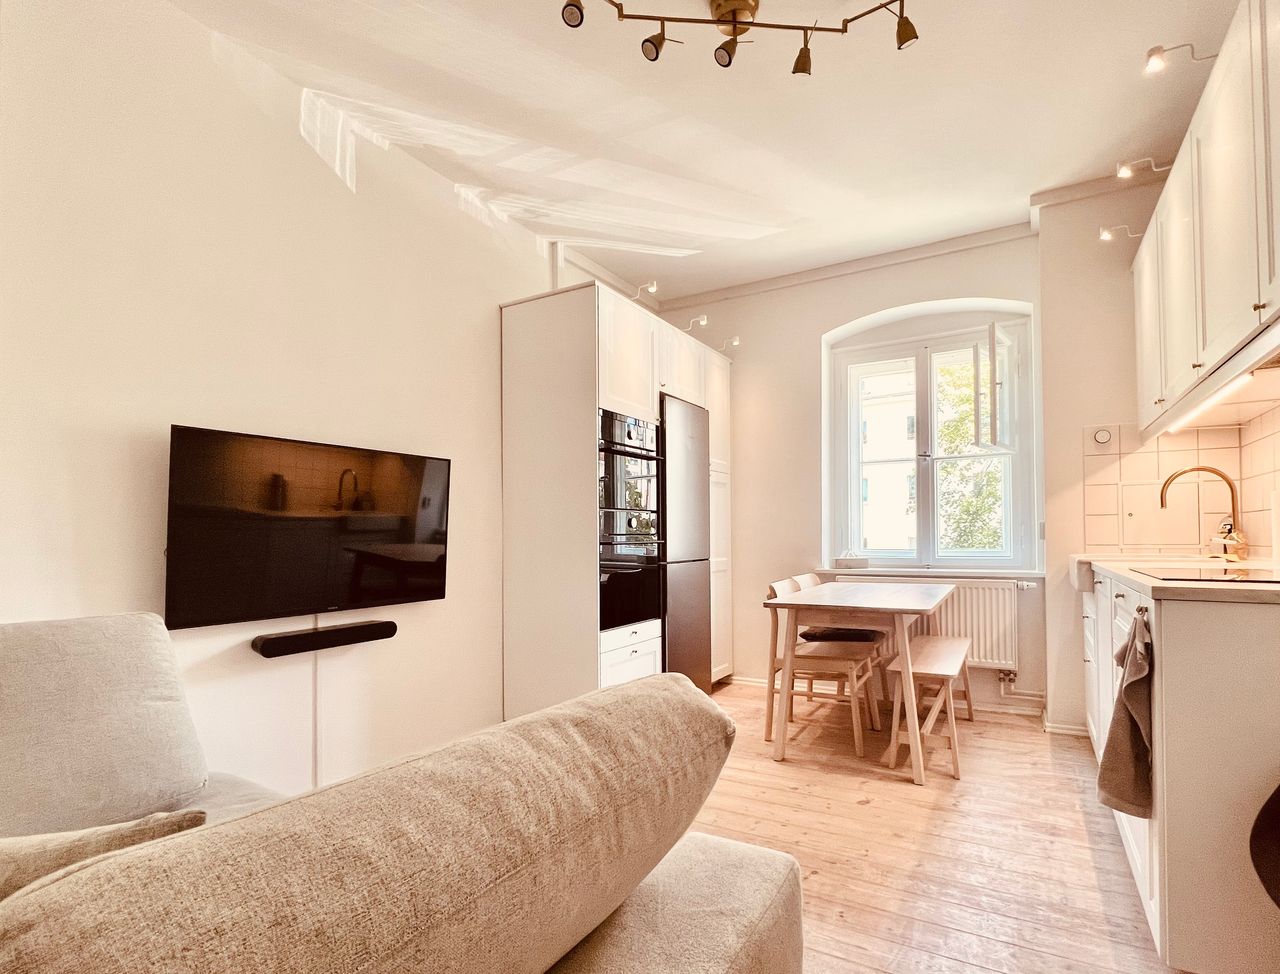 Welcome to Casa Leone - get comfortable in Prenzlauer Berg in this apartment with special features